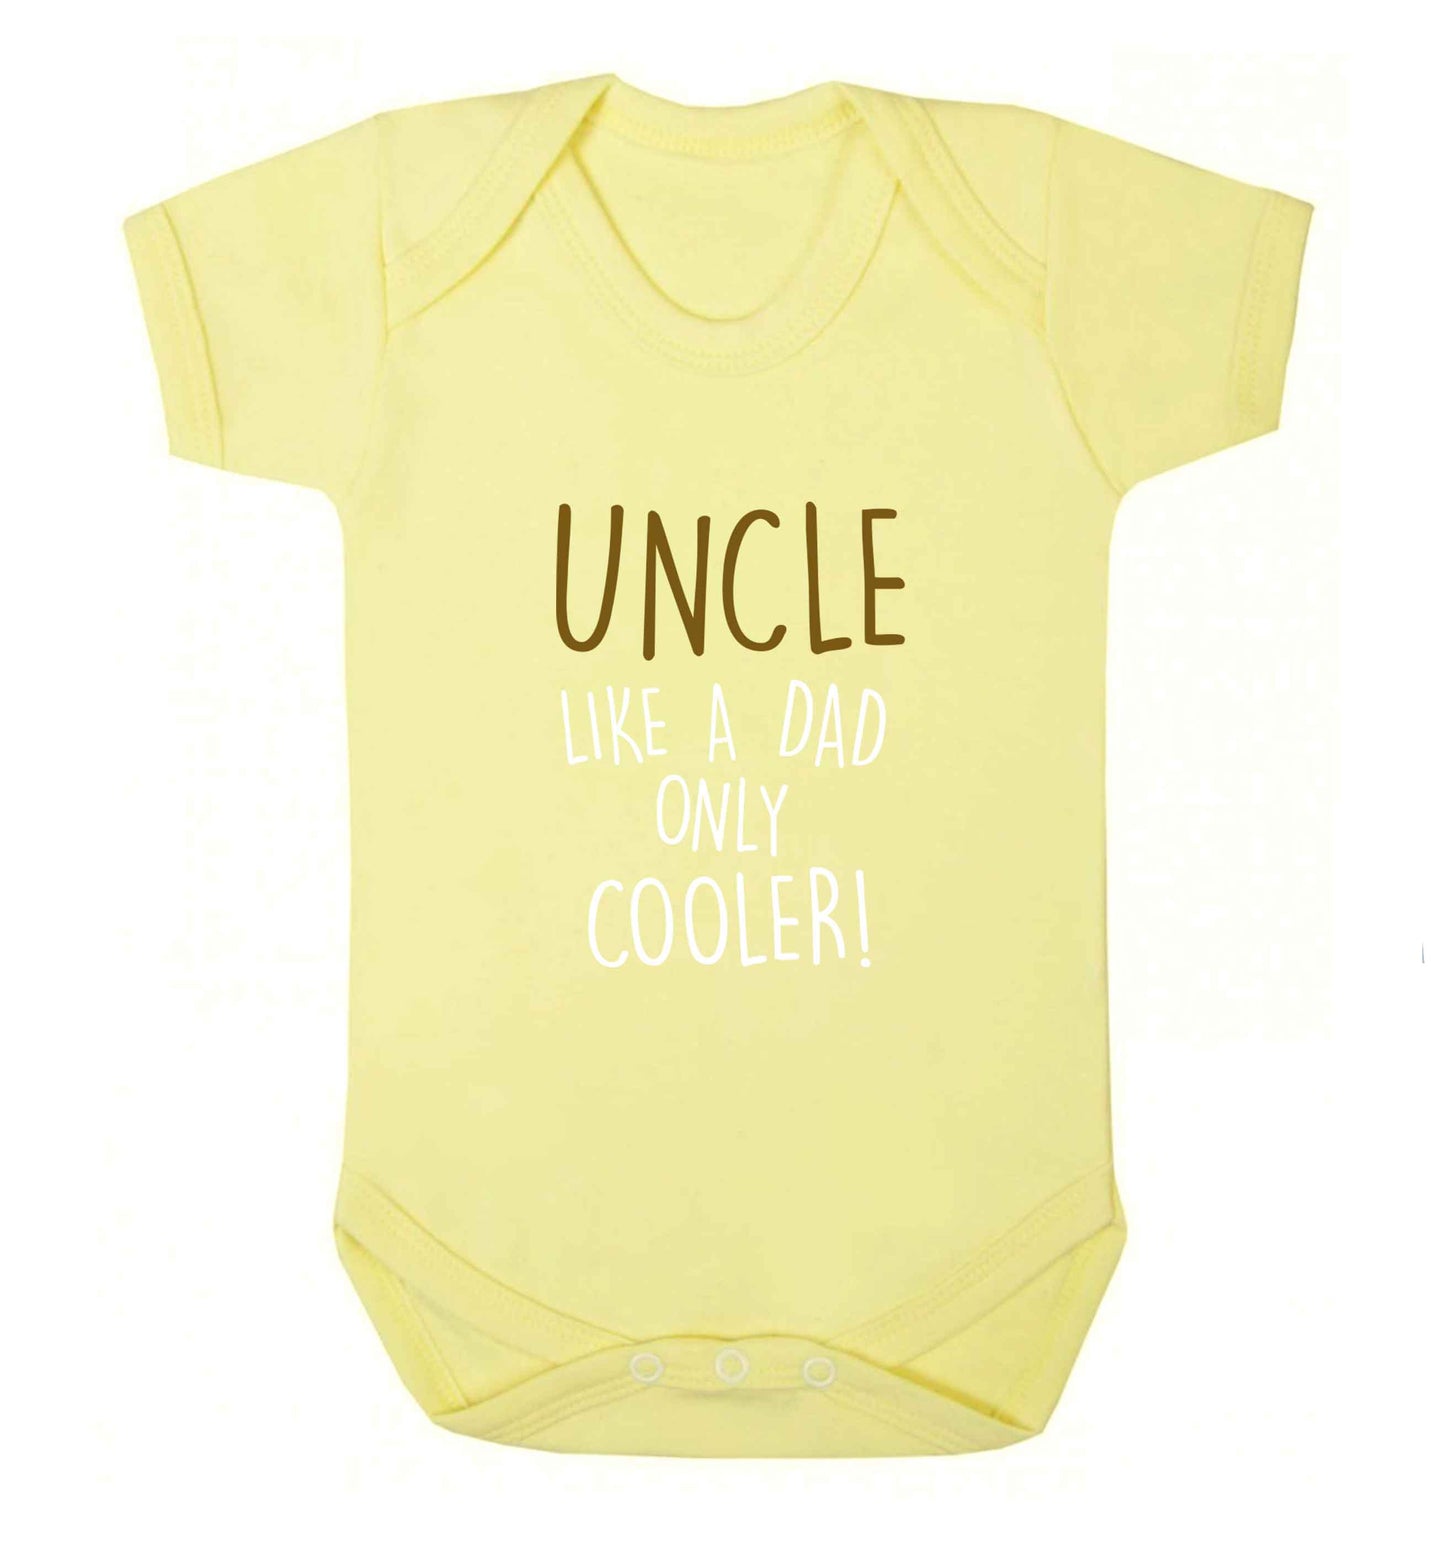 Uncle like a dad only cooler baby vest pale yellow 18-24 months